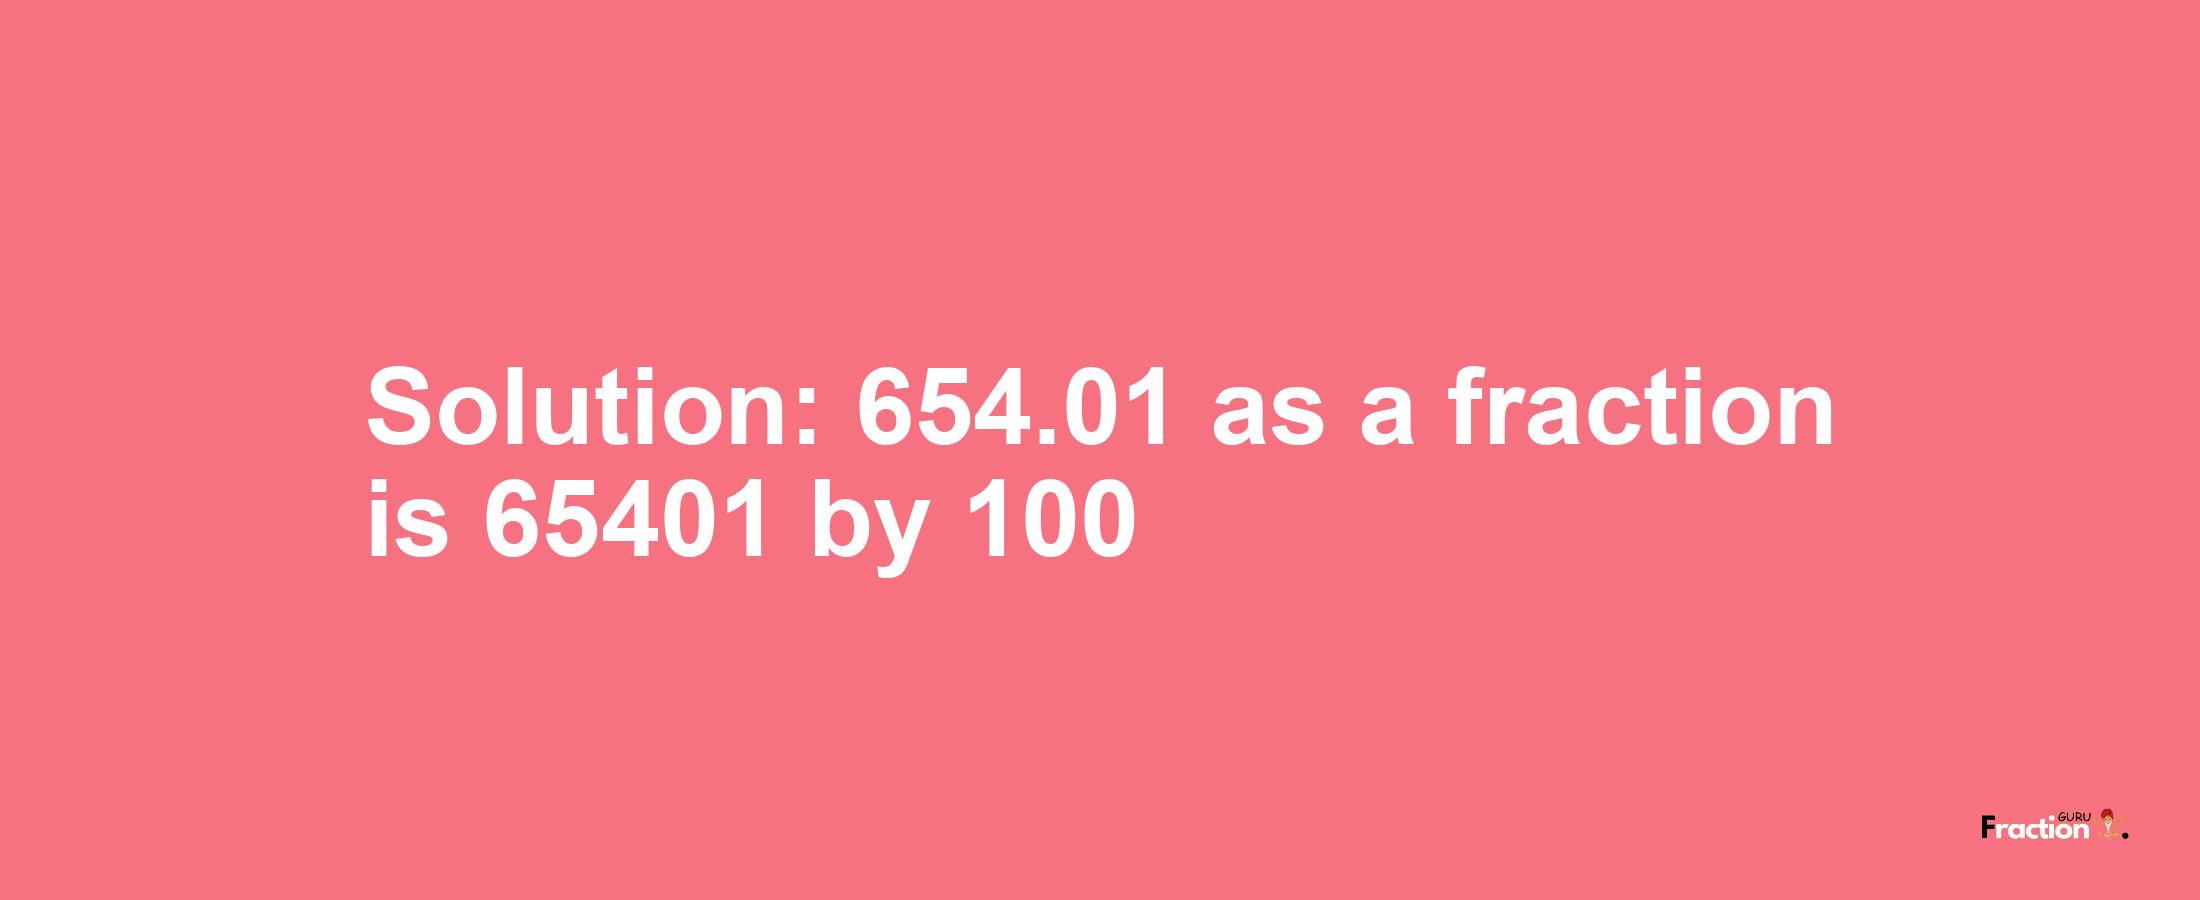 Solution:654.01 as a fraction is 65401/100